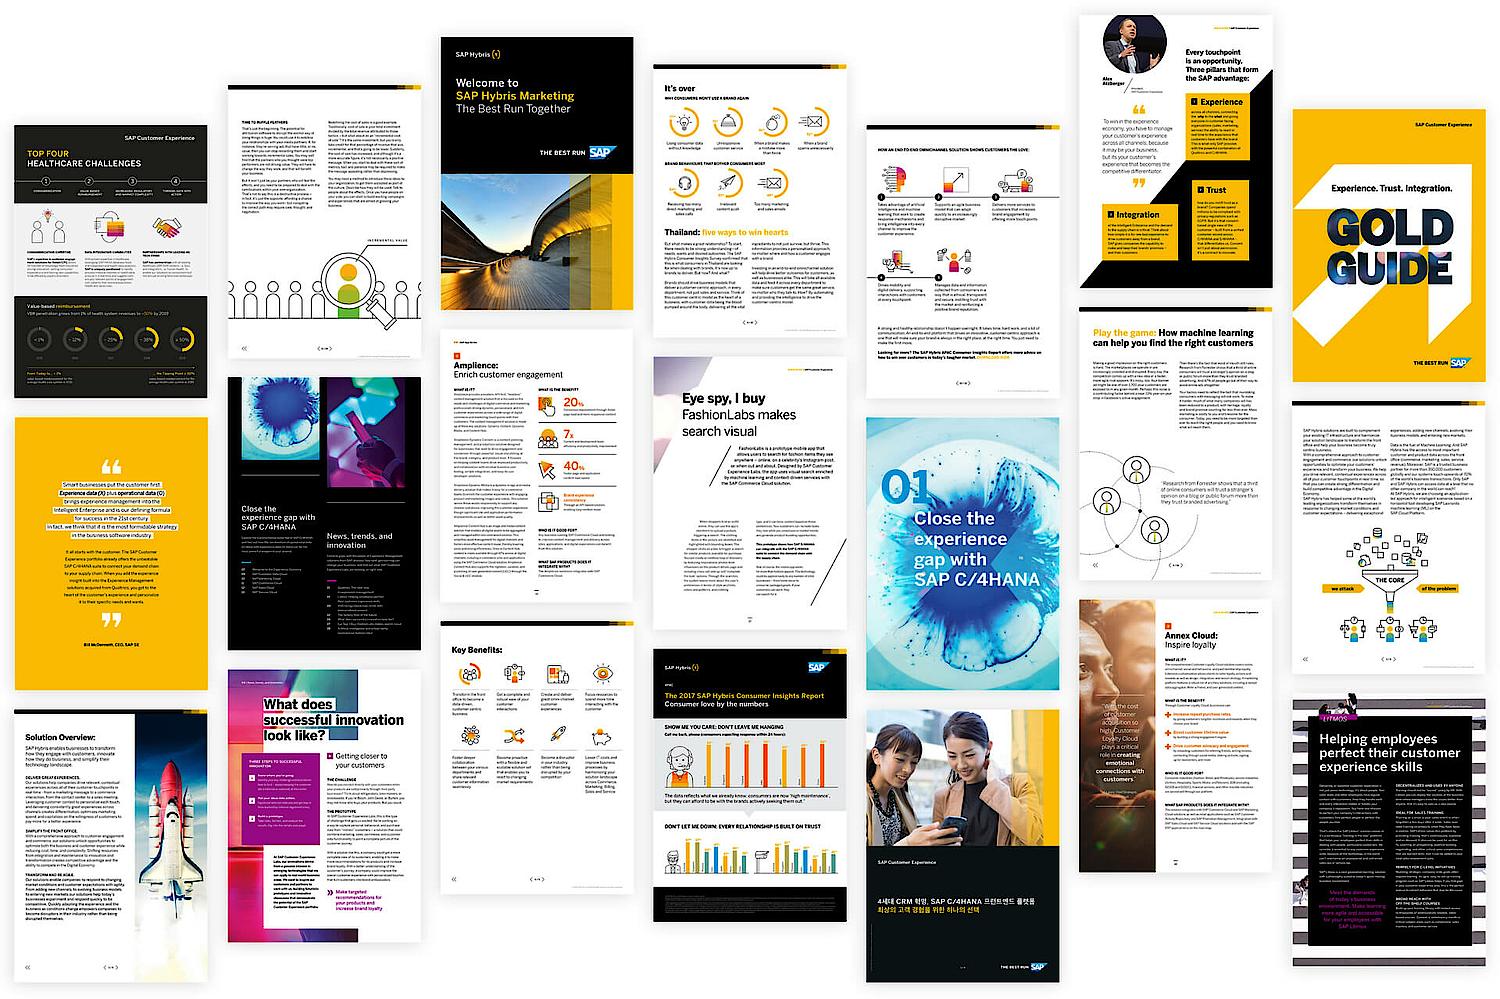 A colleciton of images shows different kinds of collaterals von SAP Hybris by deisgn agency SNK